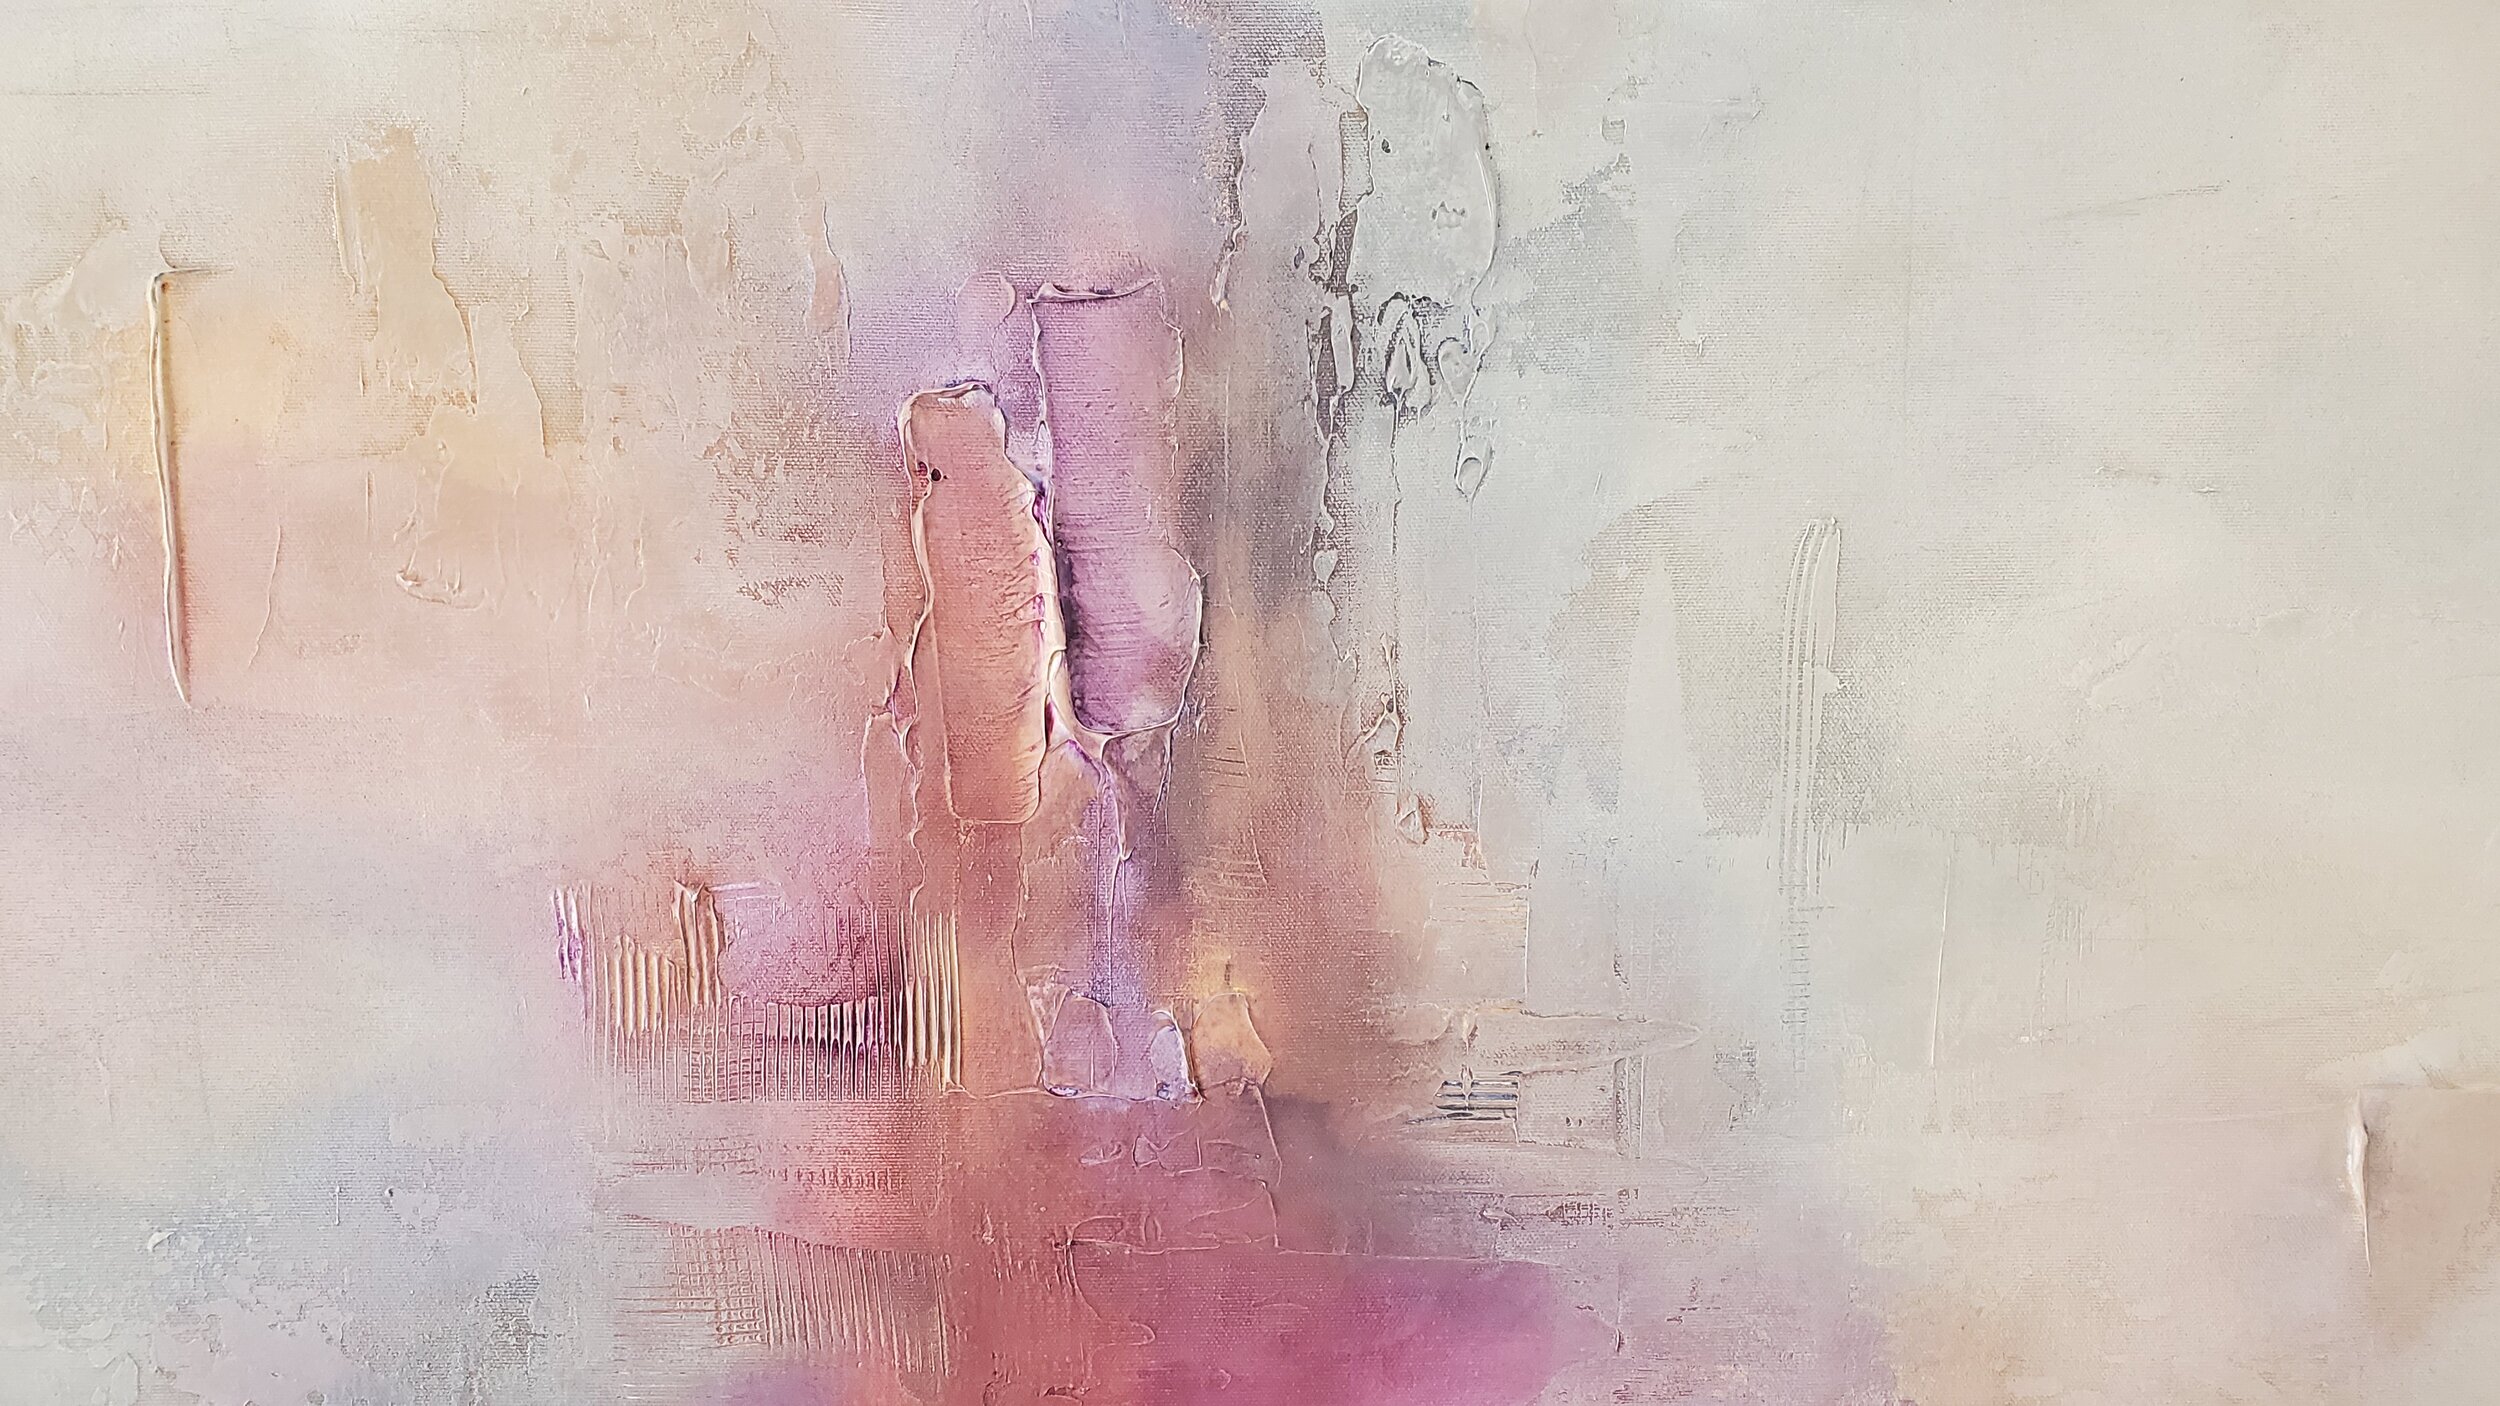  Painting #9 Help - Vancouver abstract painter, Donna Giraud has eleven new available artworks for sale in her 2020 solo art exhibition titled, Lost and Found. Her large scale, abstract, textural artworks are perfect for any interior design aesthetic